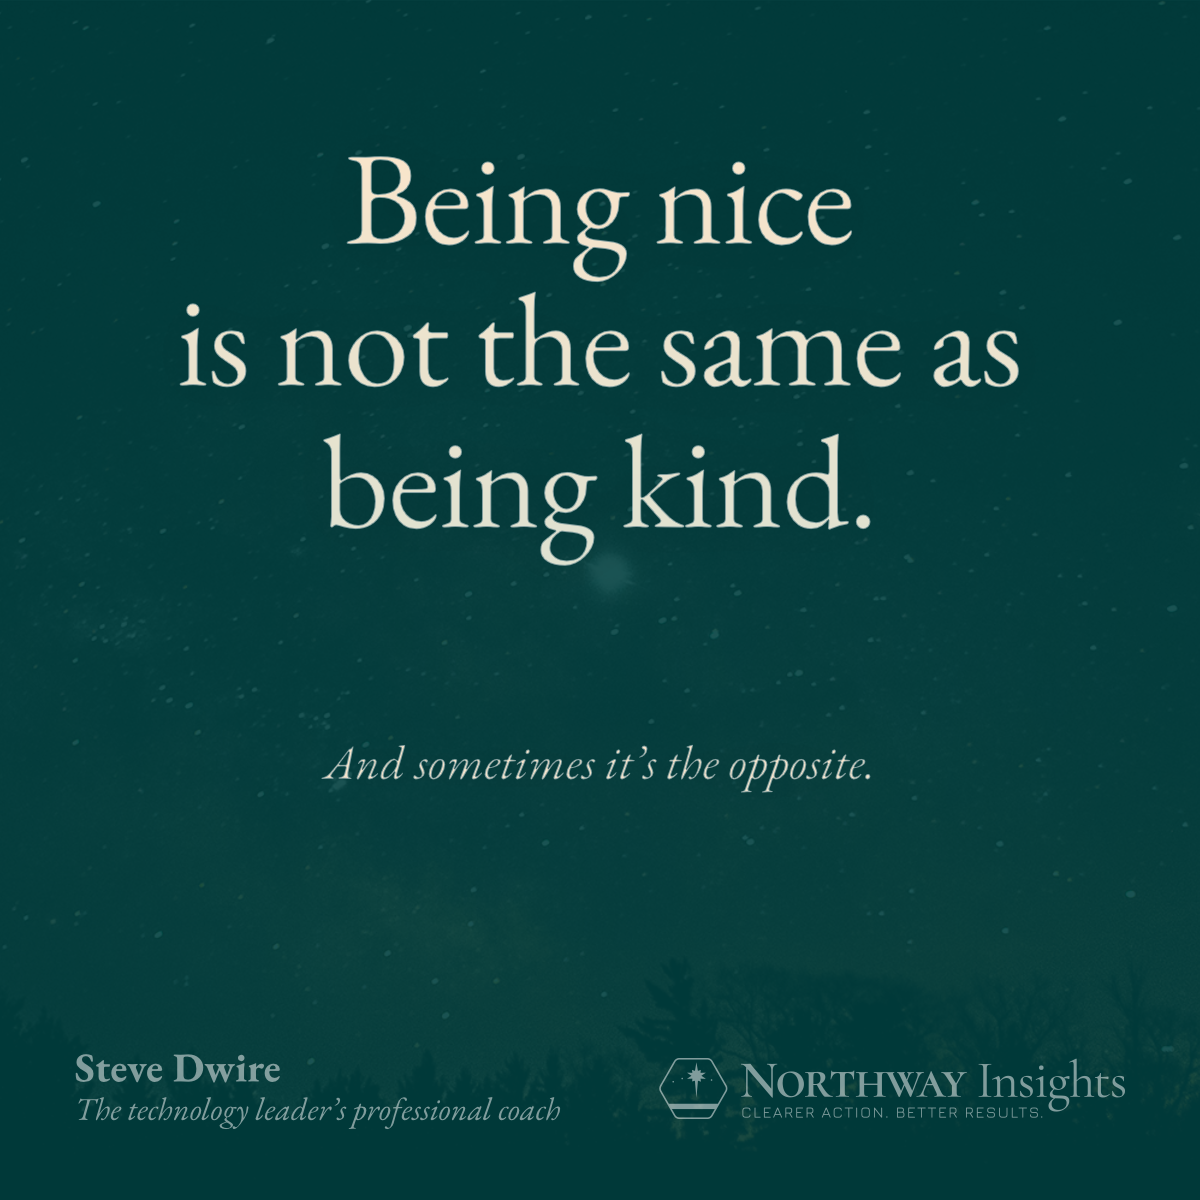 Being nice is not the same as being kind. (And sometimes it's the opposite.)